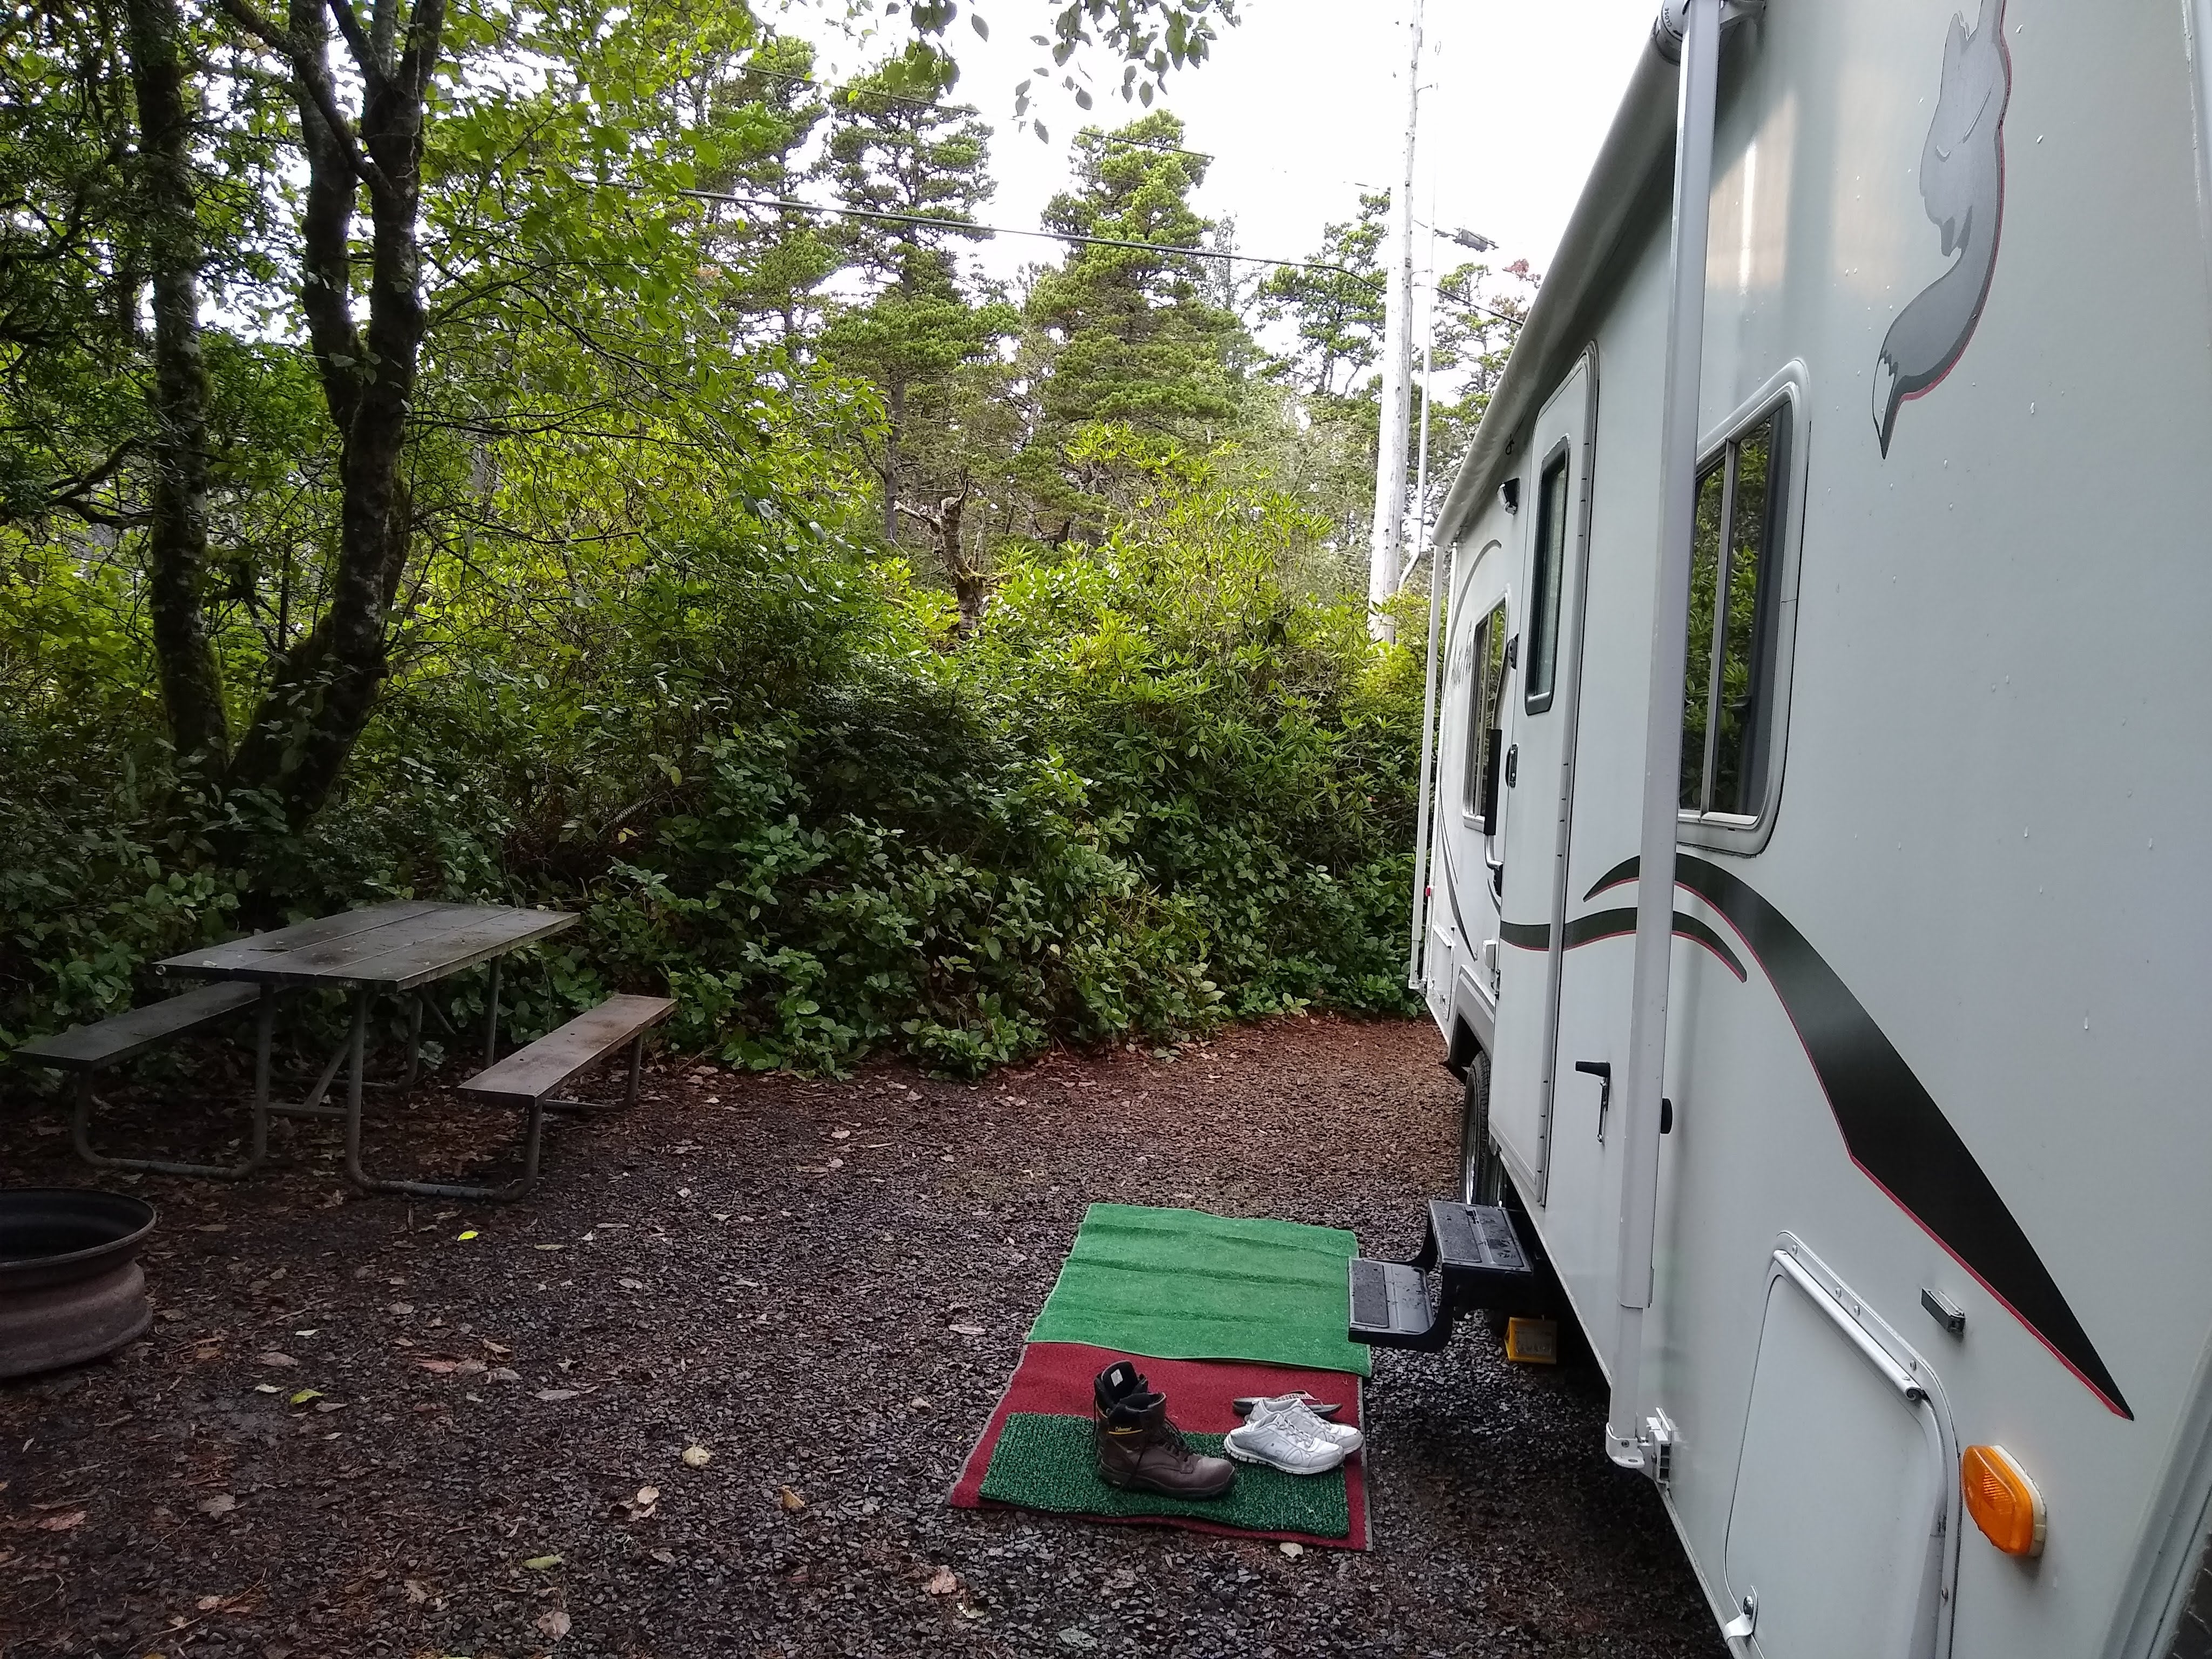 Campsite D15 has plenty of room for a picnic table.